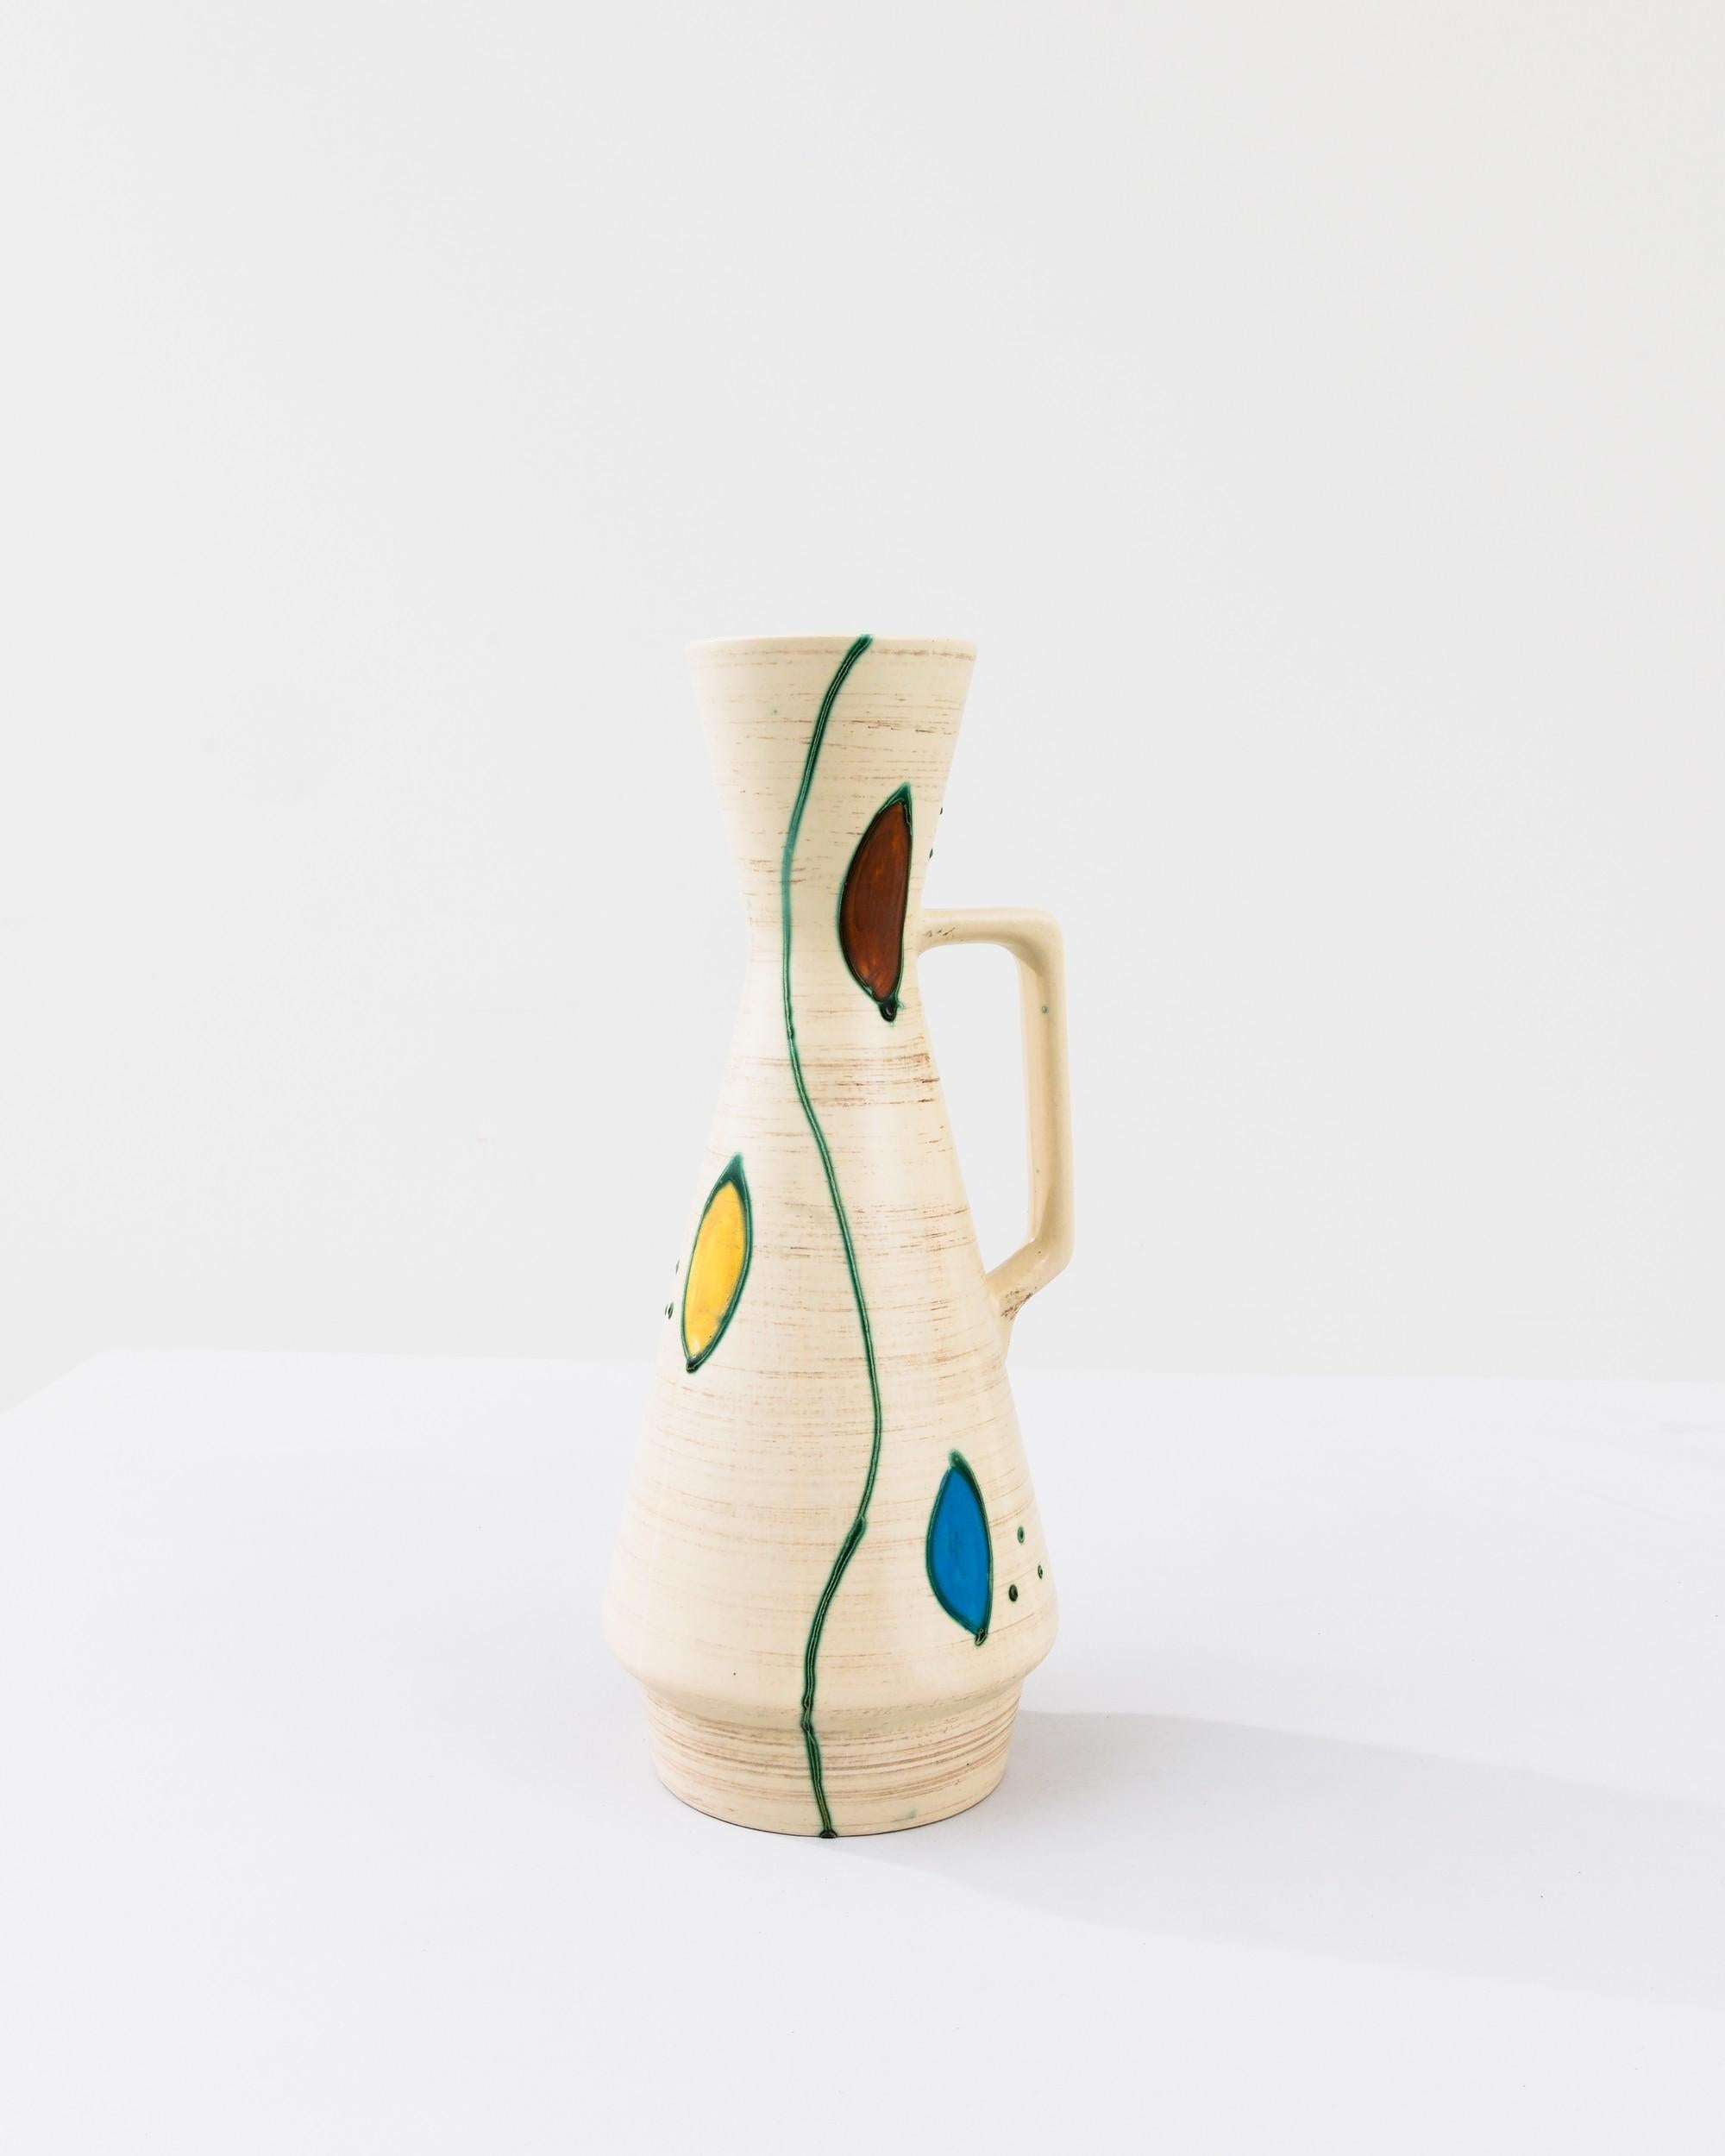 A ceramic vase from mid-20th century Germany. Neither large nor small, this studio made pot reflects the hand-held, and the handmade; the tactility of process and the artist's vision– realized on the potter’s wheel. A brushed umber tone enforces the